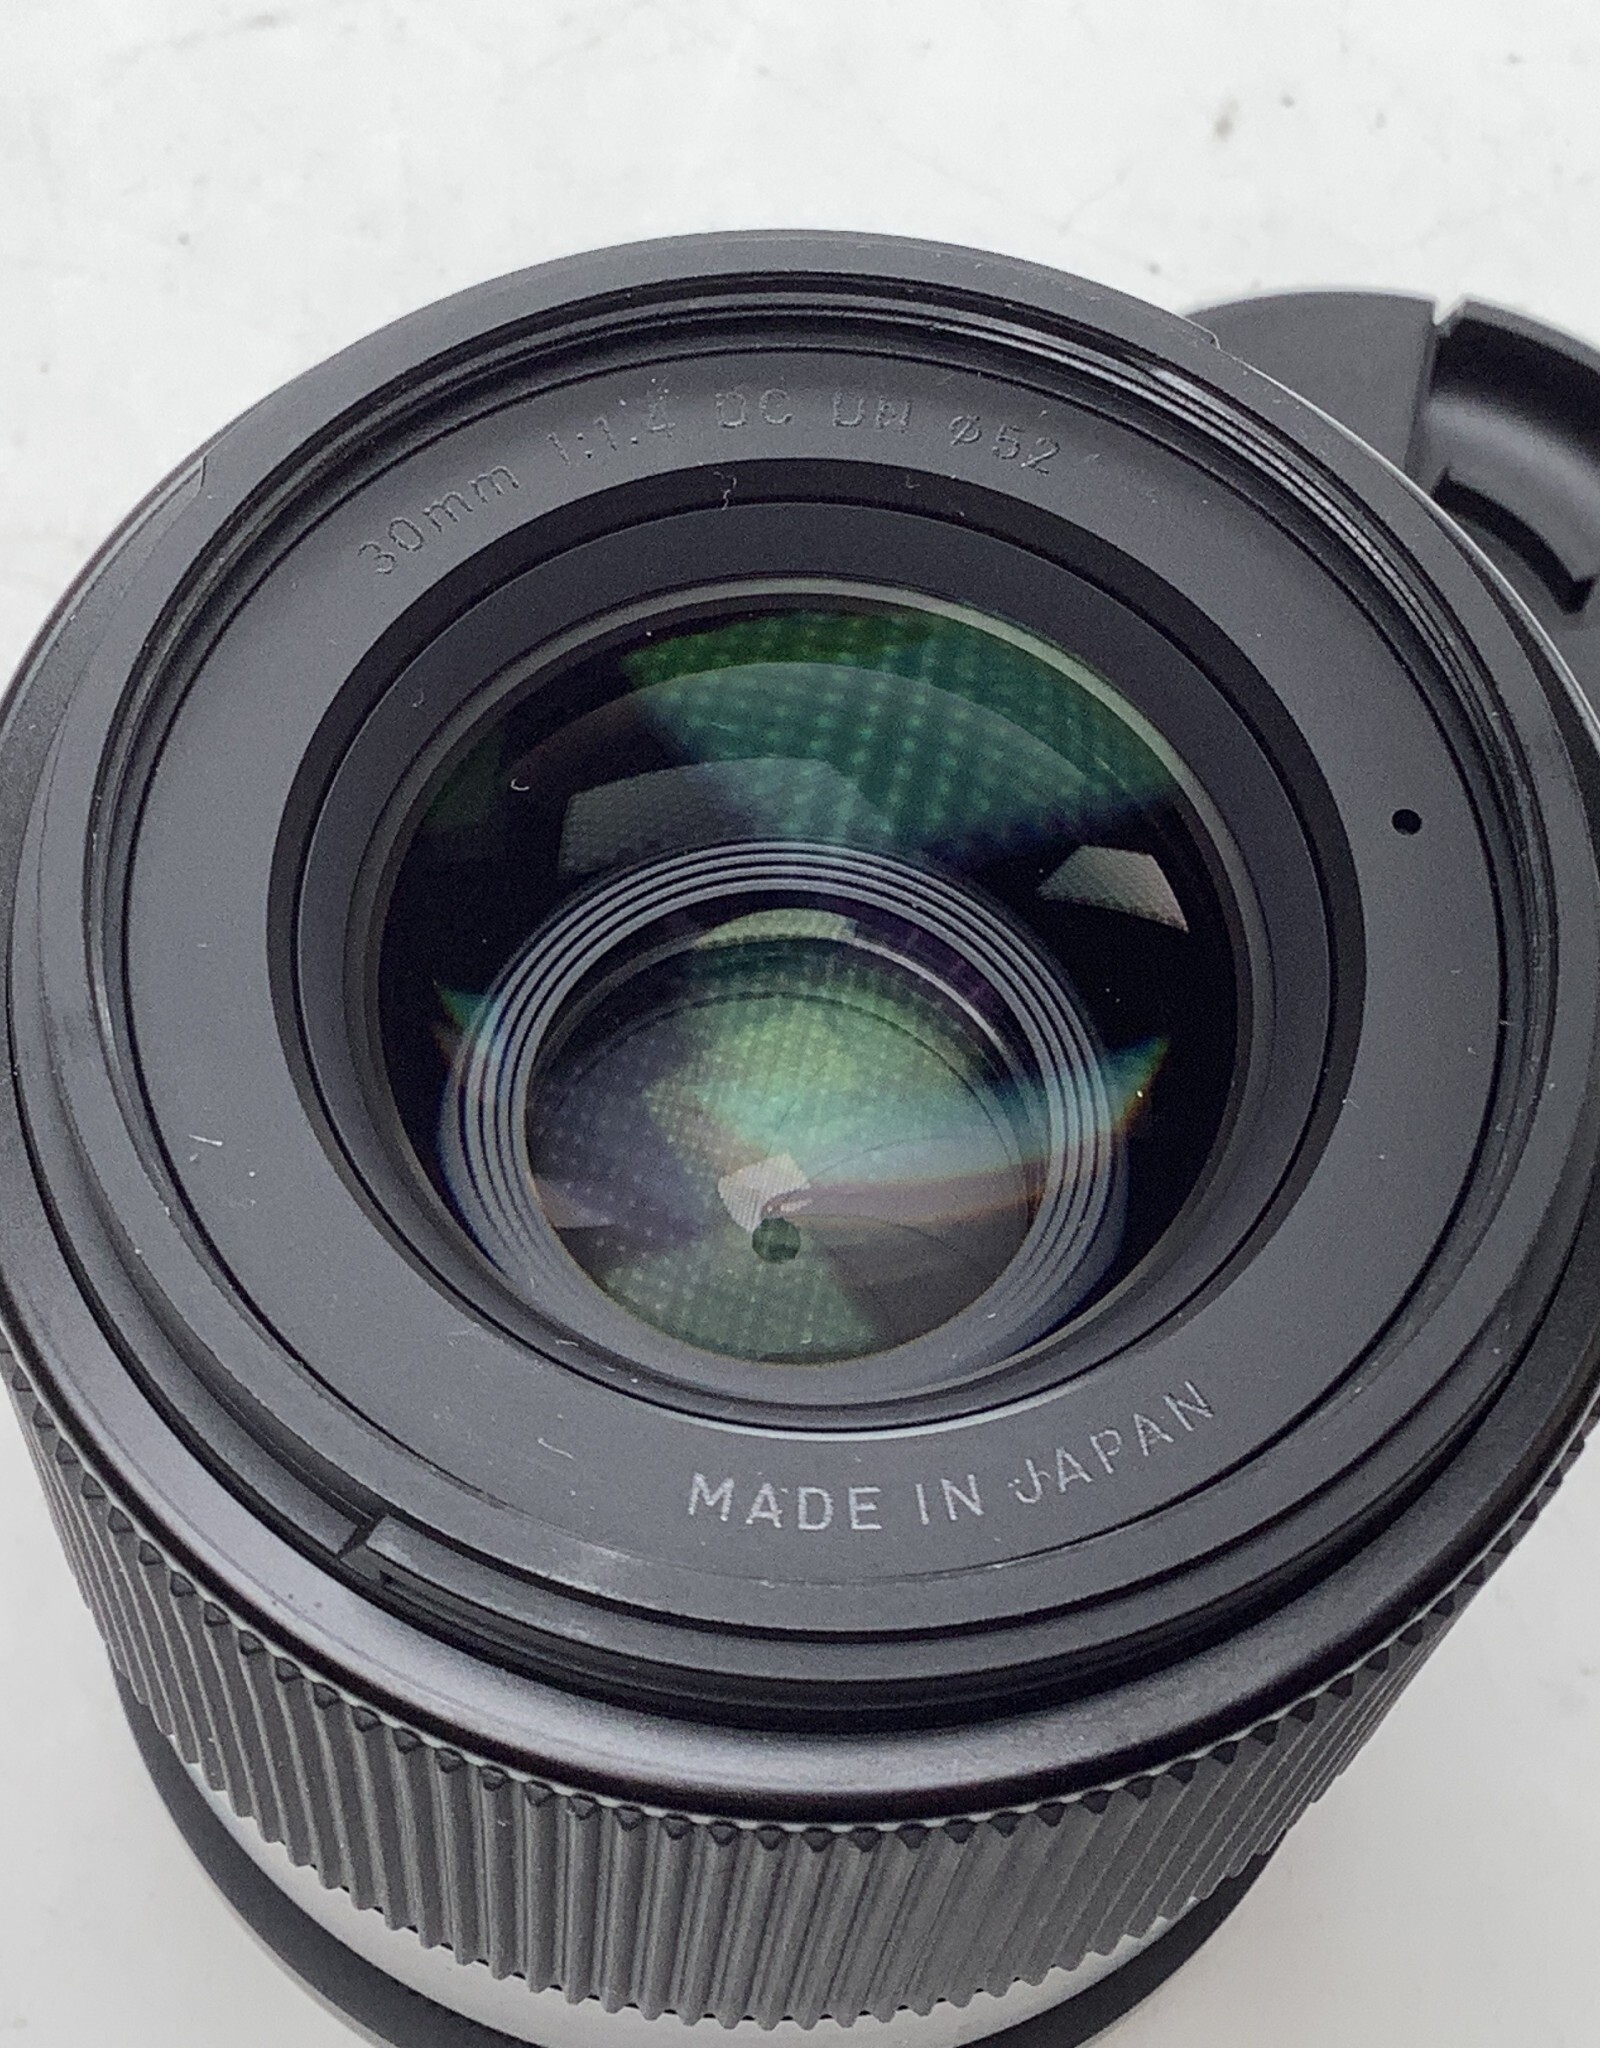 SIGMA Sigma Contemporary 30mm f1.4 DC DN L Mount Lens in Box Used EX